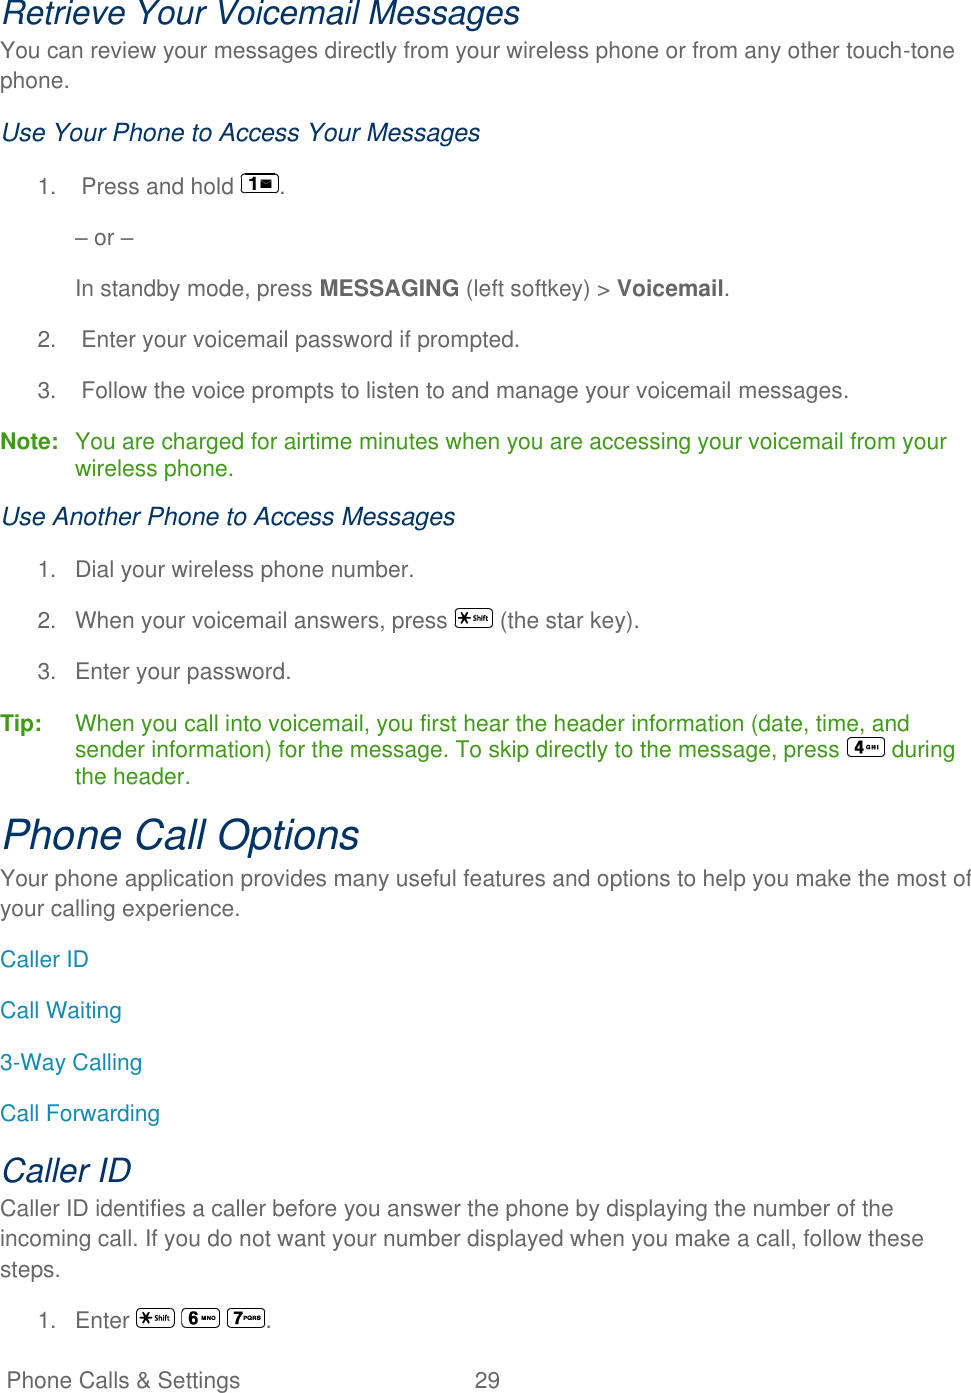   Phone Calls &amp; Settings  29   Retrieve Your Voicemail Messages You can review your messages directly from your wireless phone or from any other touch-tone phone.  Use Your Phone to Access Your Messages 1.  Press and hold  . – or – In standby mode, press MESSAGING (left softkey) &gt; Voicemail. 2.  Enter your voicemail password if prompted. 3.  Follow the voice prompts to listen to and manage your voicemail messages. Note:  You are charged for airtime minutes when you are accessing your voicemail from your wireless phone. Use Another Phone to Access Messages 1.  Dial your wireless phone number. 2.  When your voicemail answers, press   (the star key). 3.  Enter your password. Tip:   When you call into voicemail, you first hear the header information (date, time, and sender information) for the message. To skip directly to the message, press   during the header. Phone Call Options Your phone application provides many useful features and options to help you make the most of your calling experience. Caller ID Call Waiting 3-Way Calling Call Forwarding Caller ID Caller ID identifies a caller before you answer the phone by displaying the number of the incoming call. If you do not want your number displayed when you make a call, follow these steps. 1.  Enter      . 